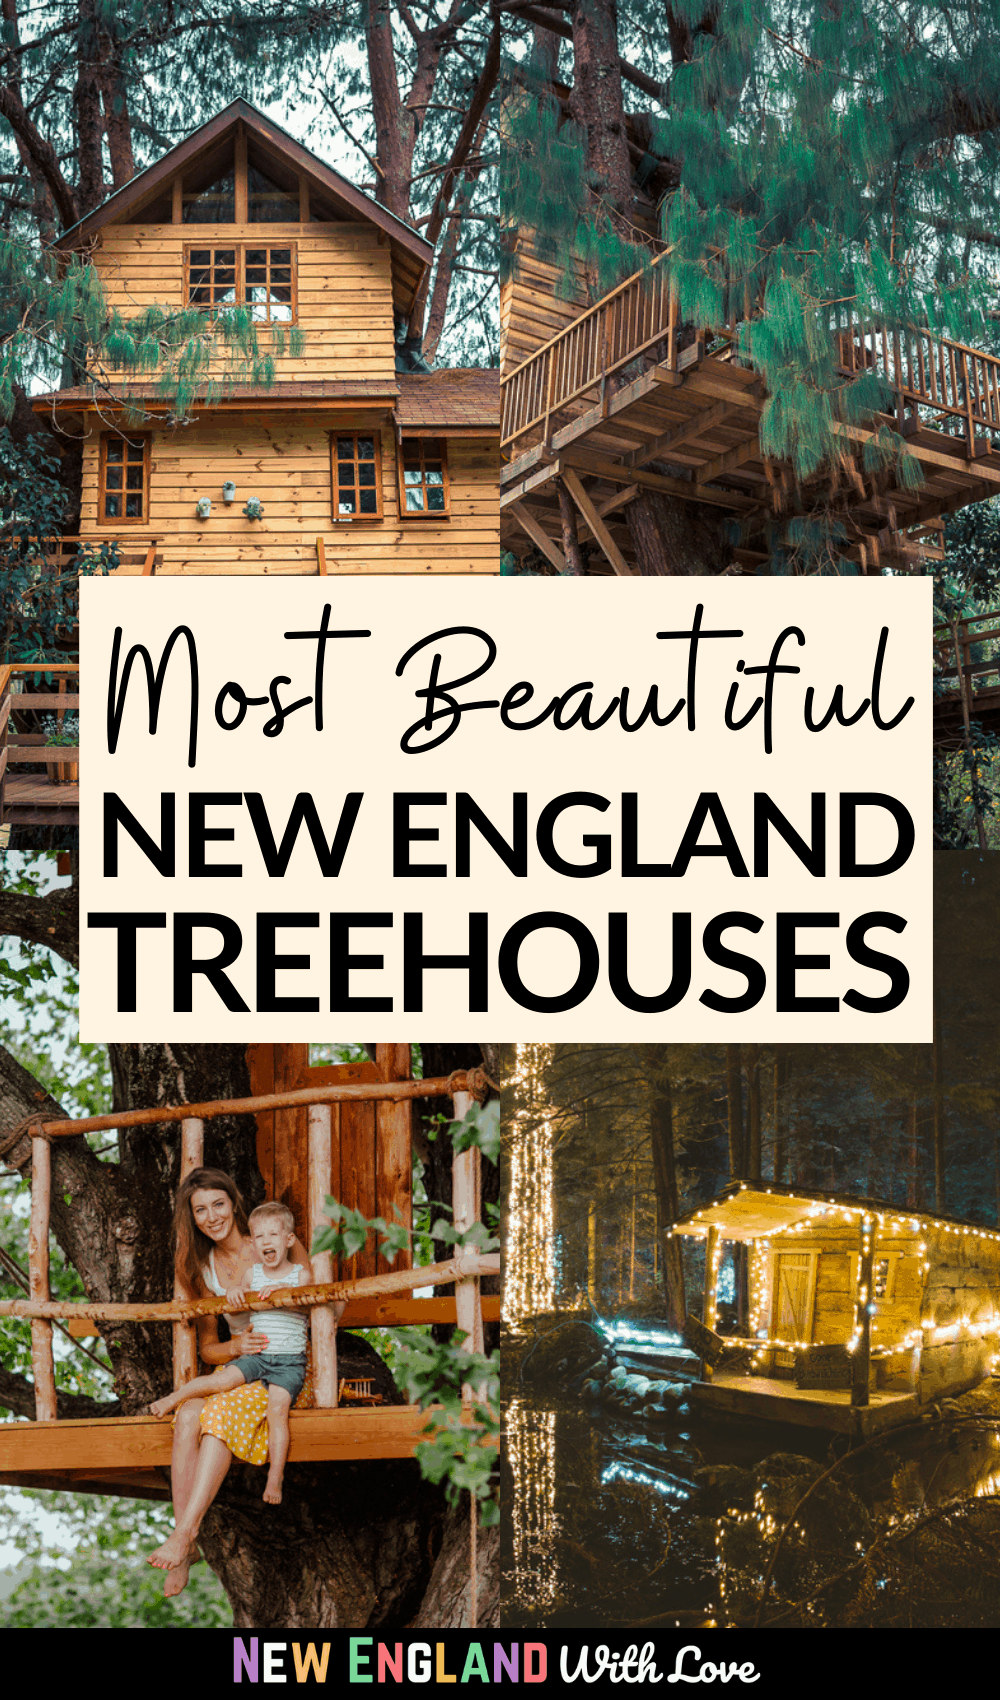 Pinterest graphic reading "Most Beautiful NEW ENGLAND TREEHOUSES"